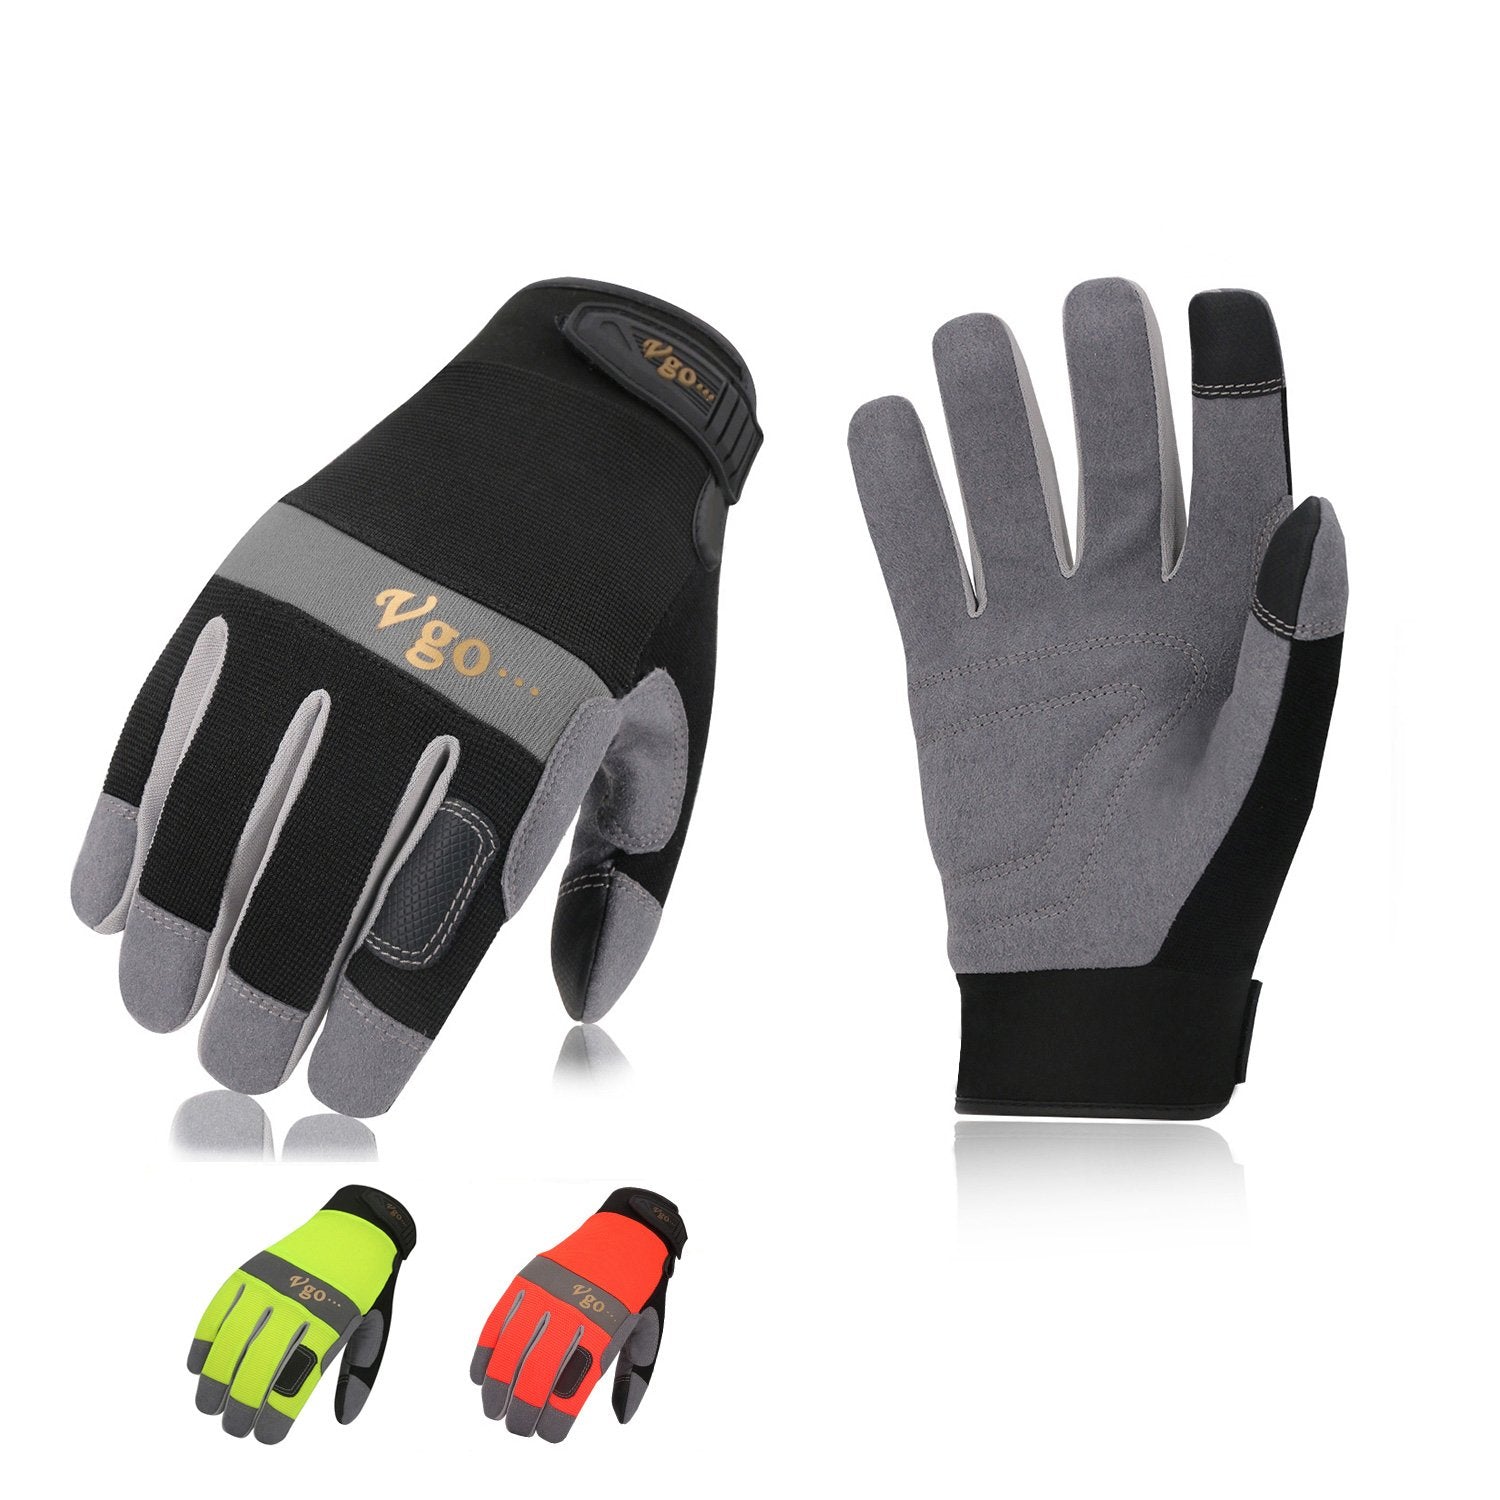 Vgo 1/3Pairs Synthetic Leather Work Gloves for Men, Mechanic Gloves(SL7584)